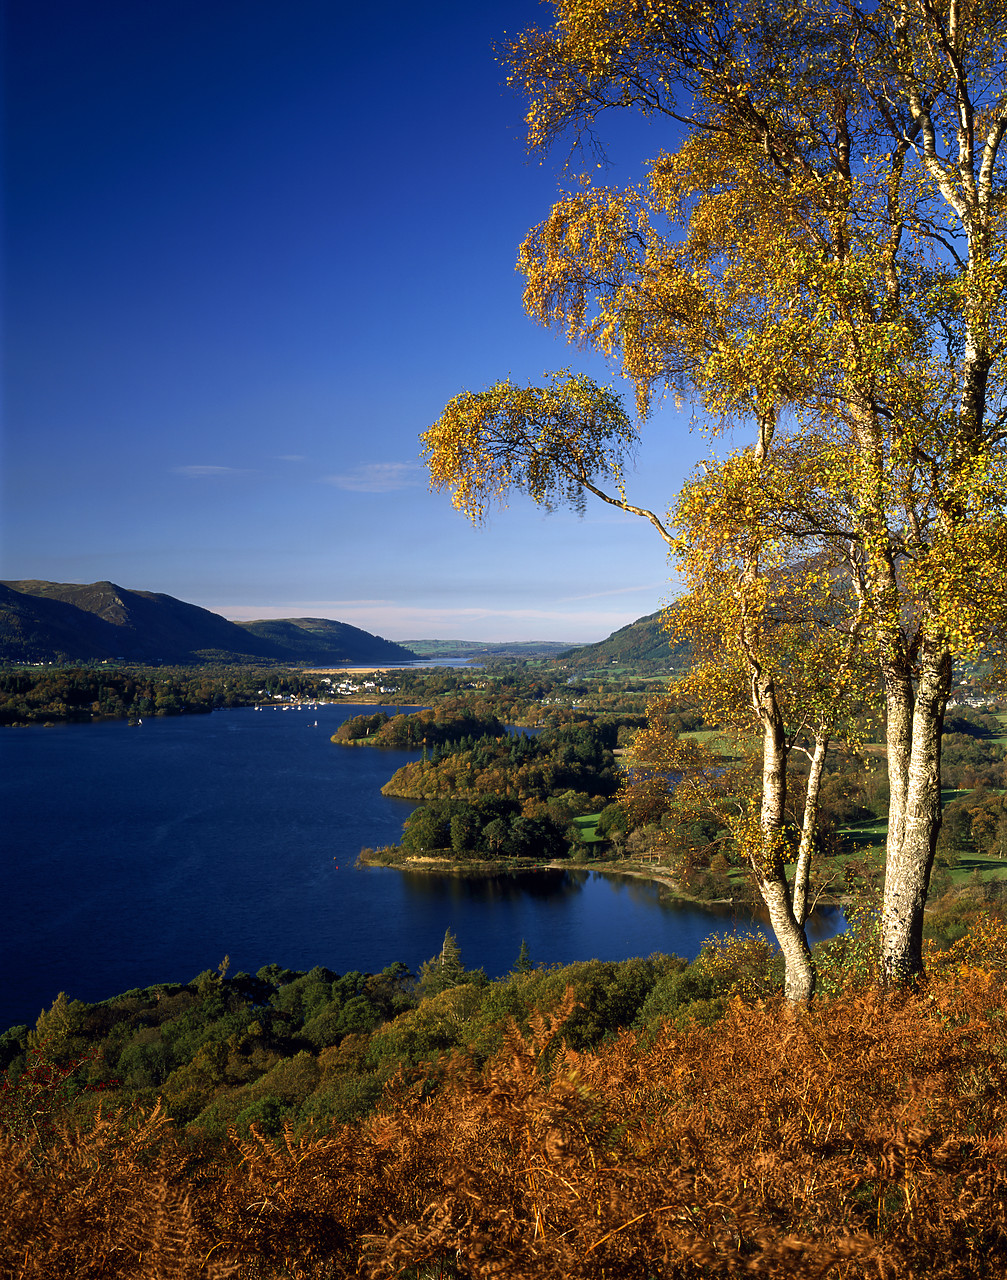 #060768-2 - View over Derwent Water, Lake District National Park, Cumbria, England